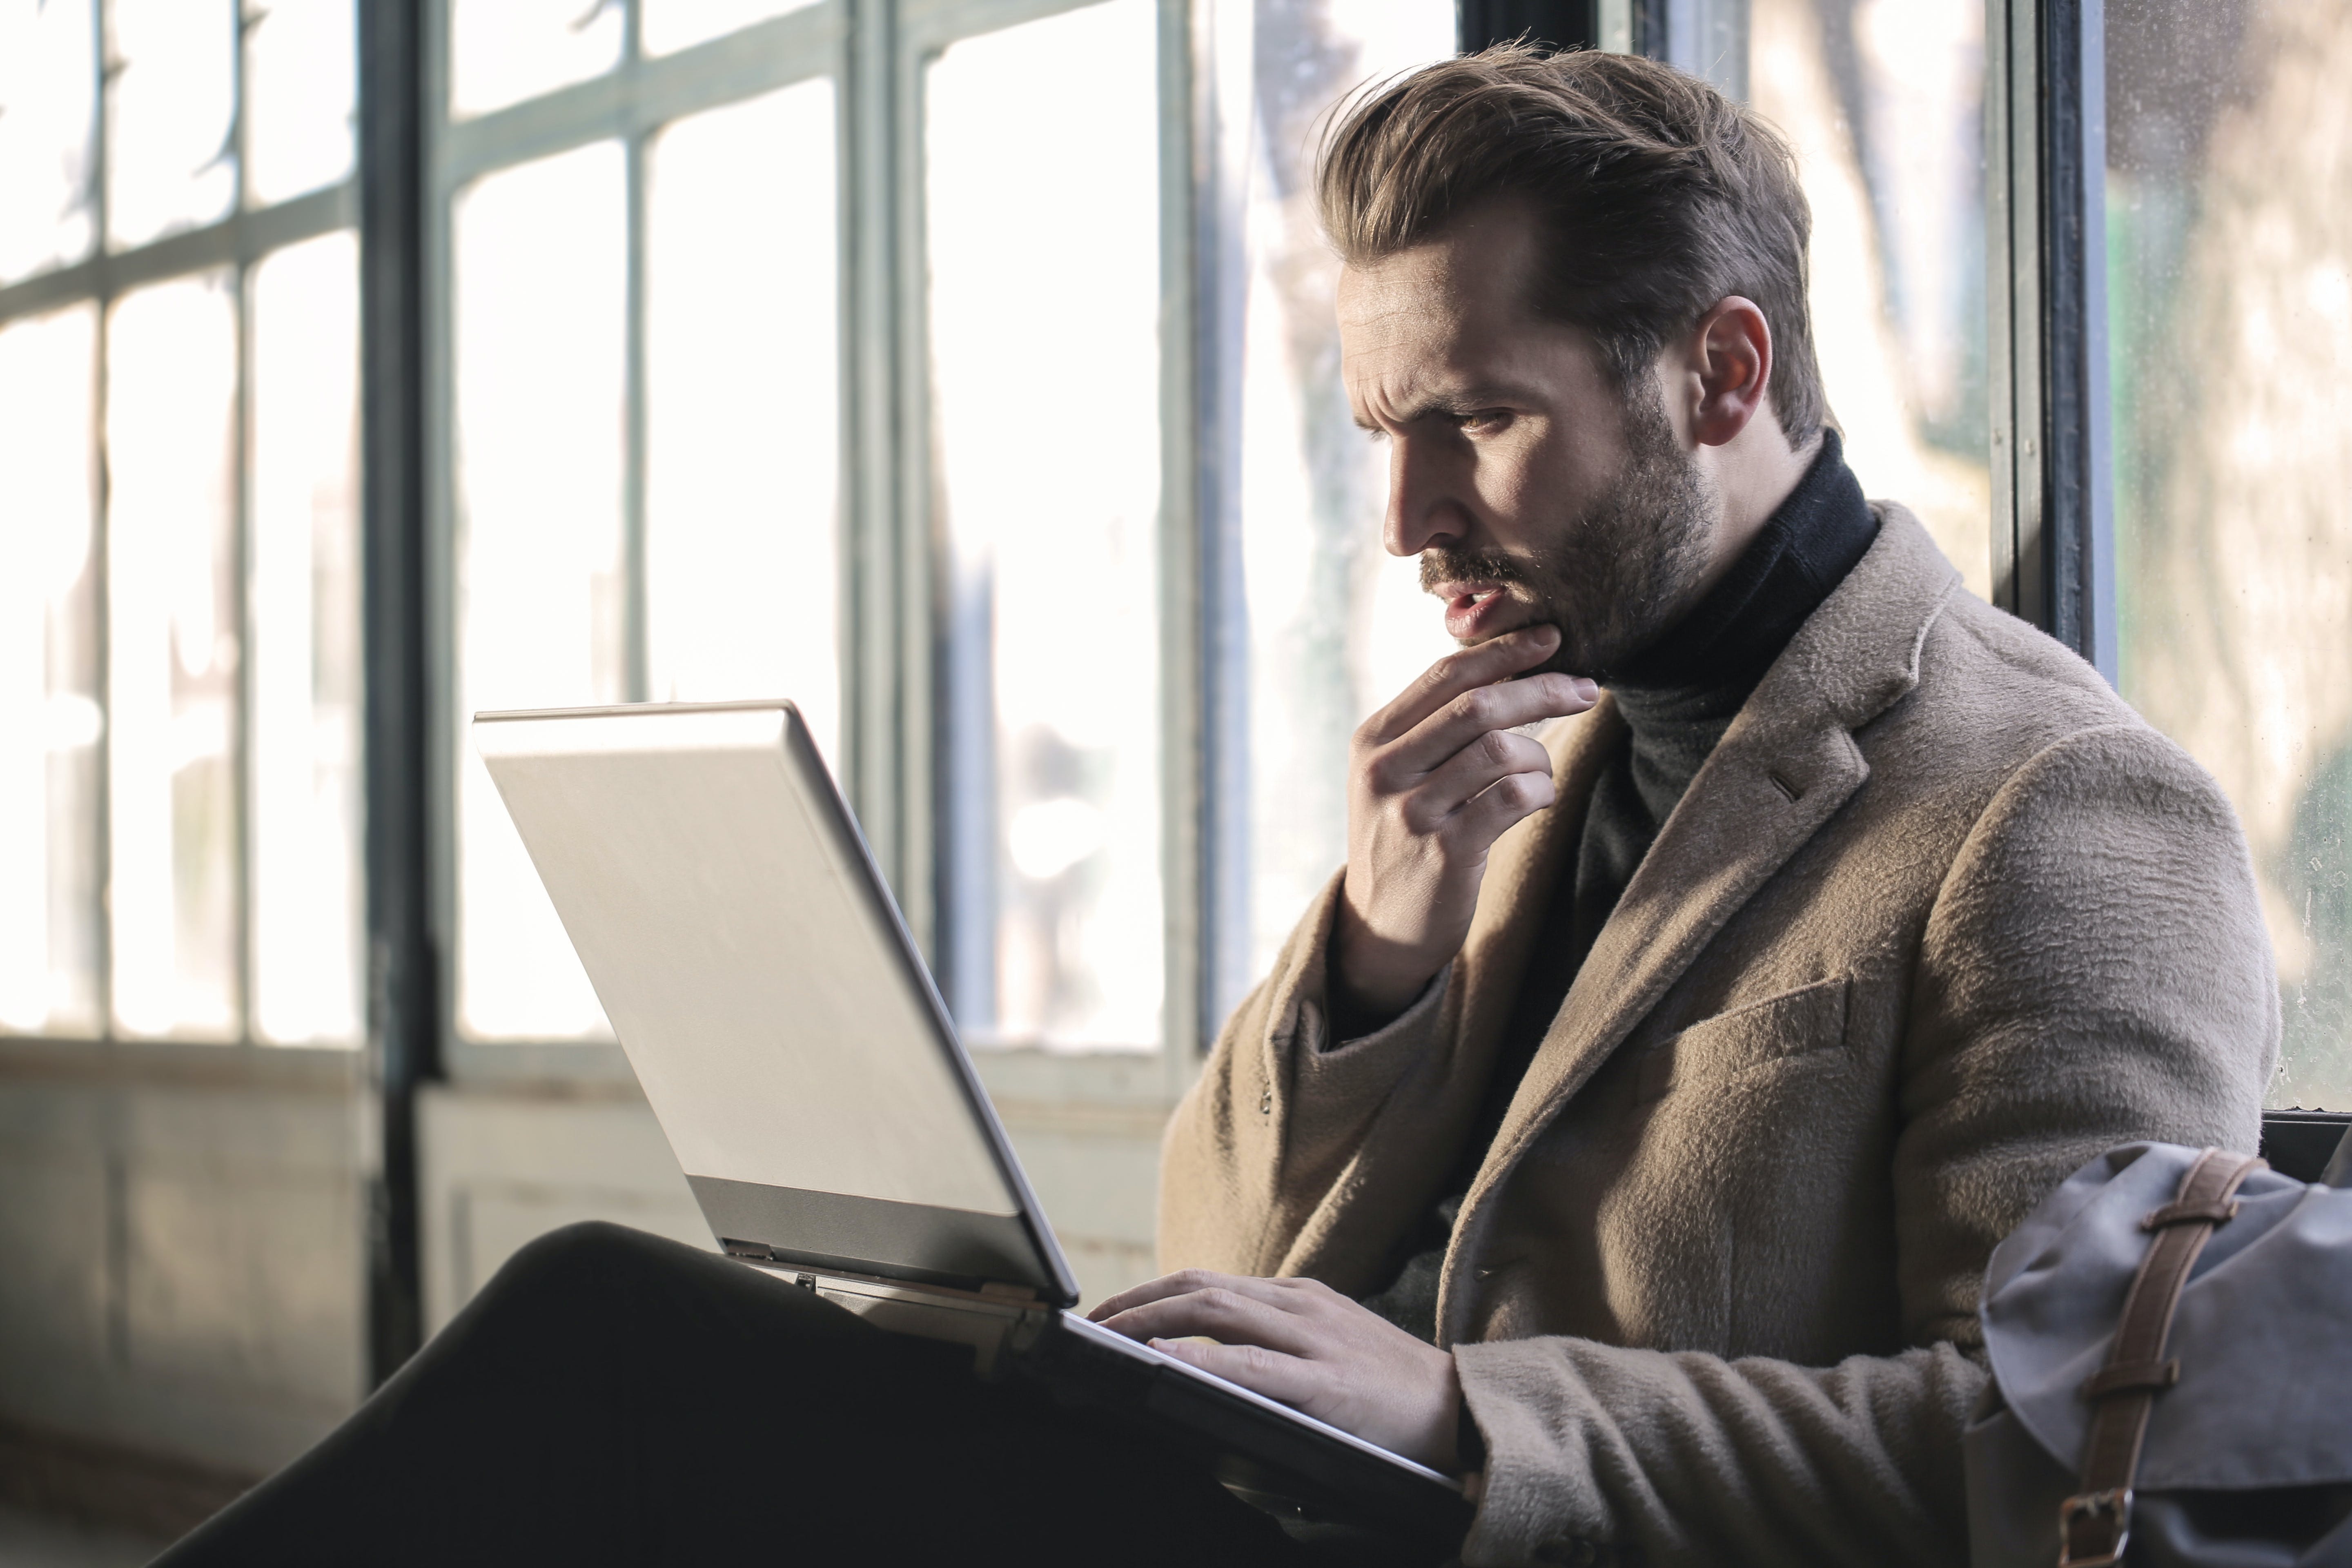 A confused man holding his chin while seated looking at a laptop | Source: Pexels